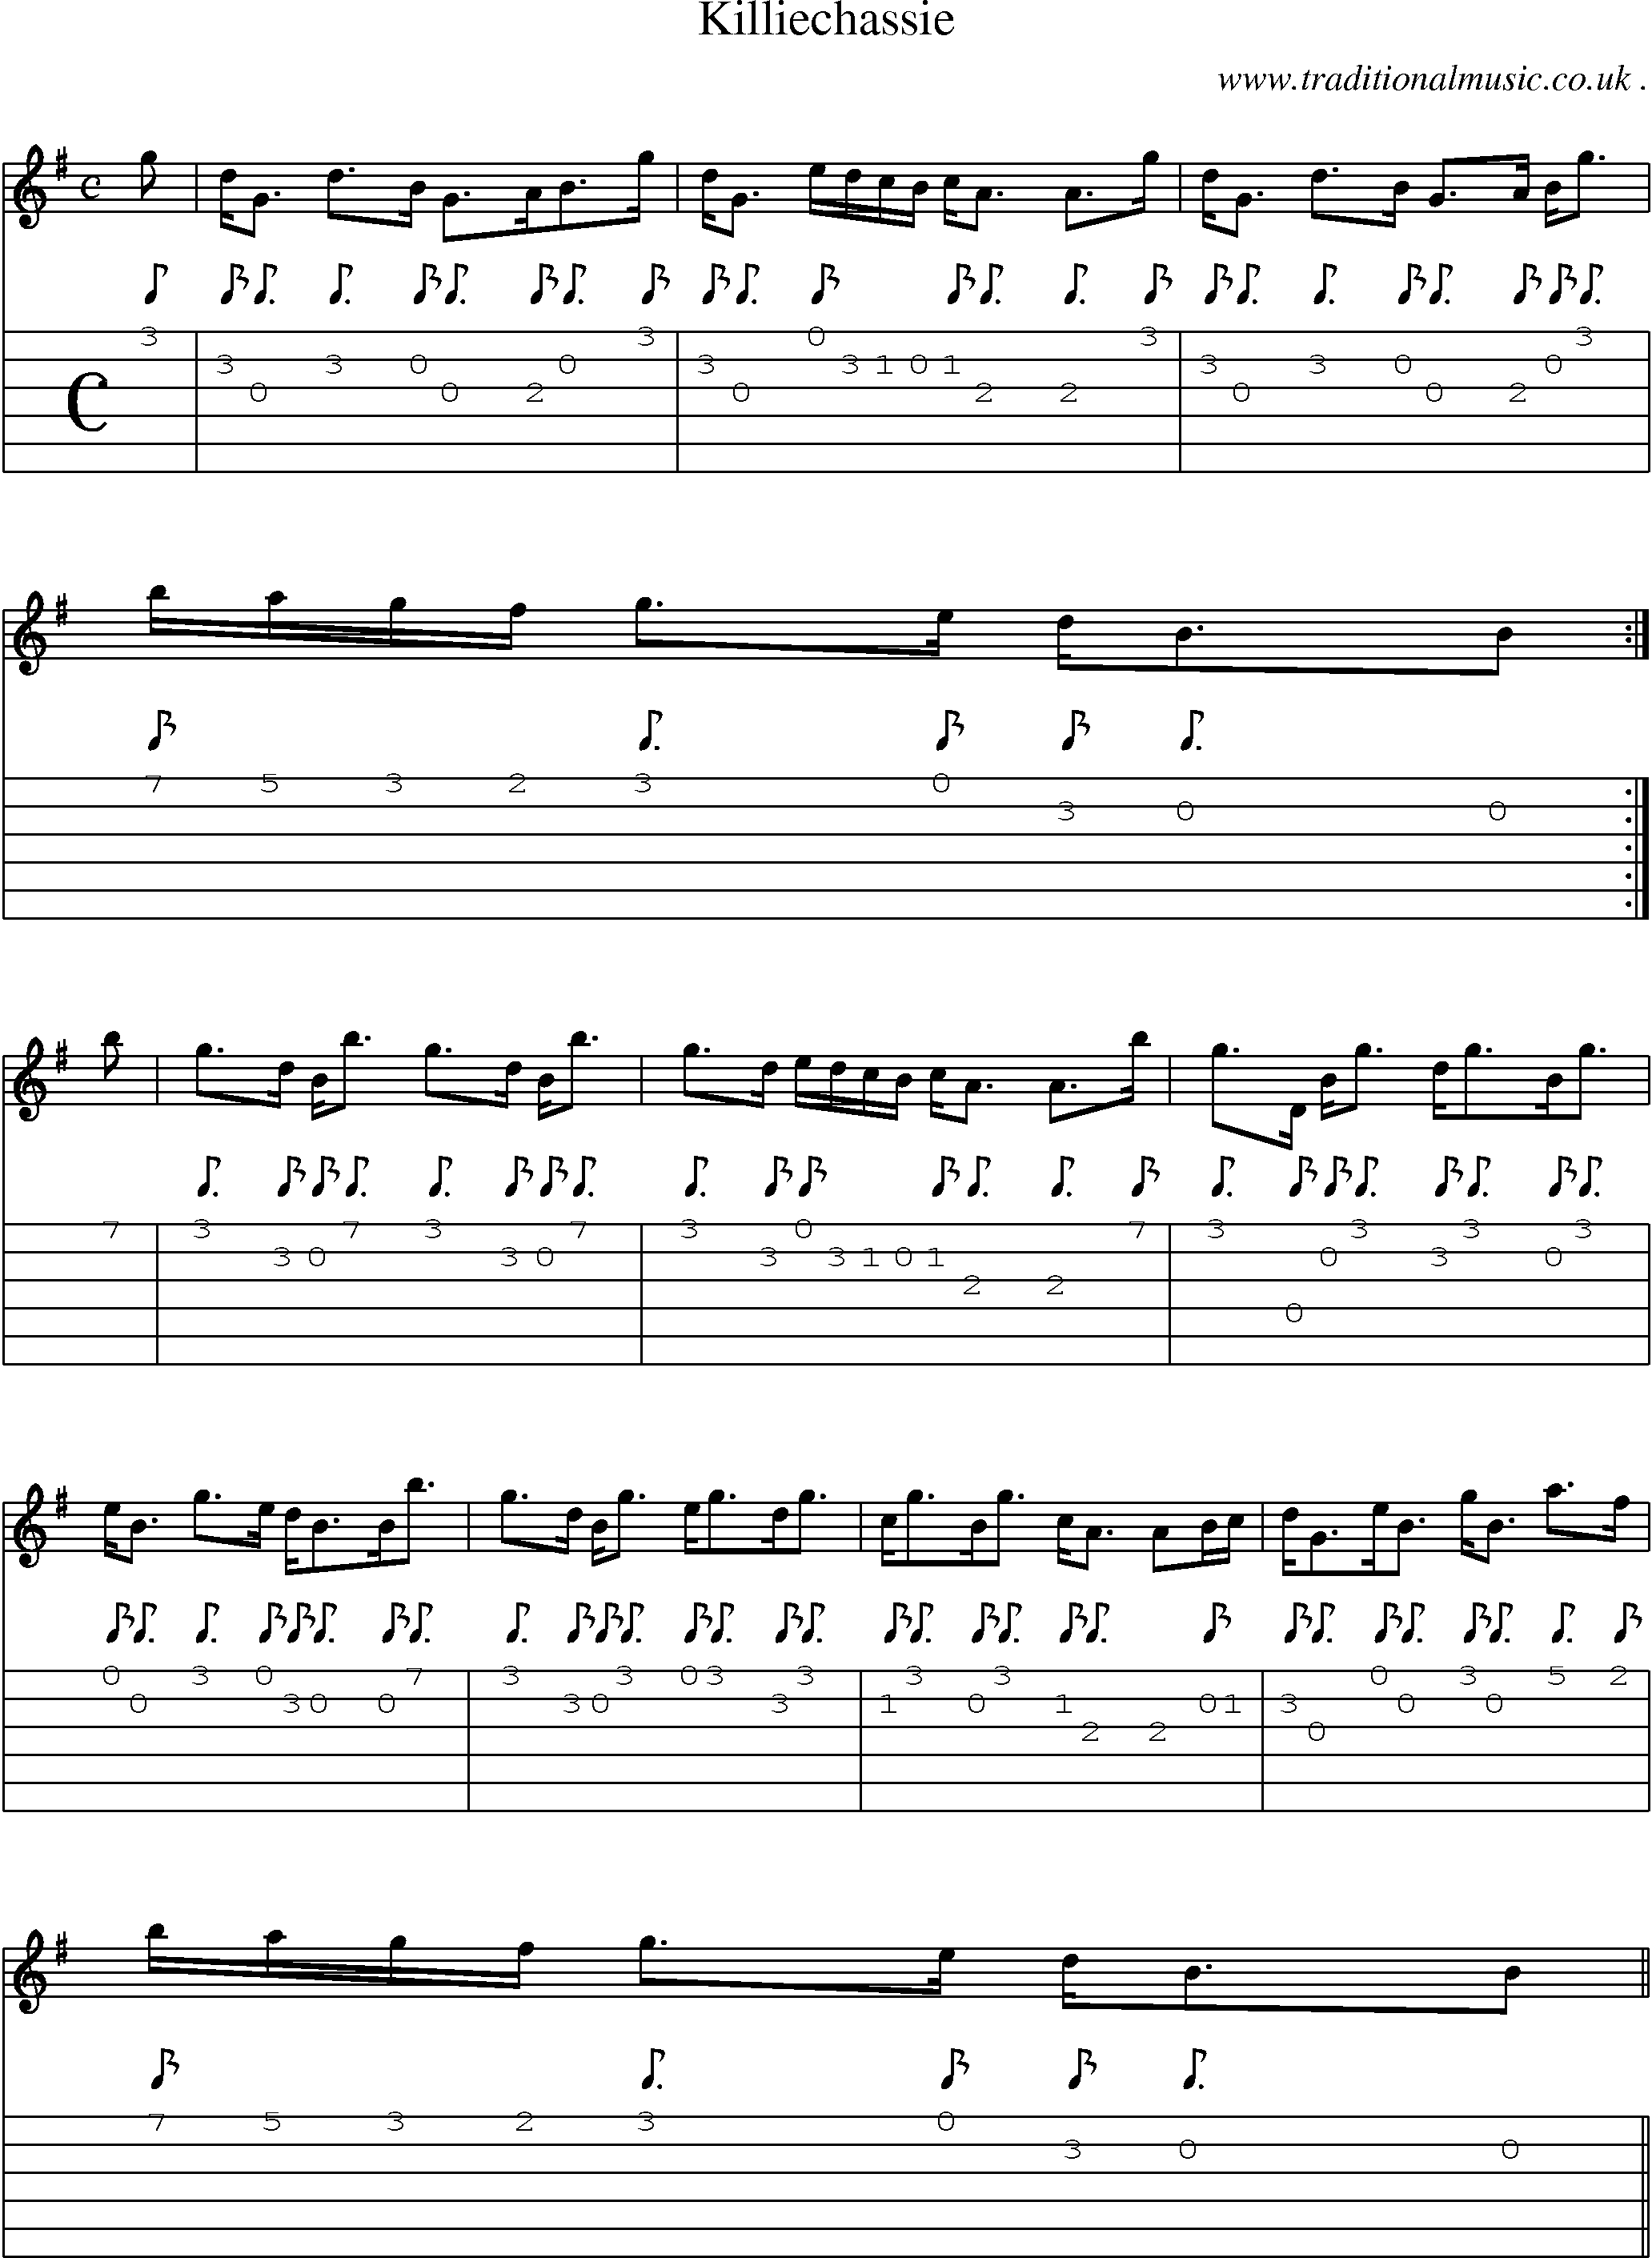 Sheet-music  score, Chords and Guitar Tabs for Killiechassie